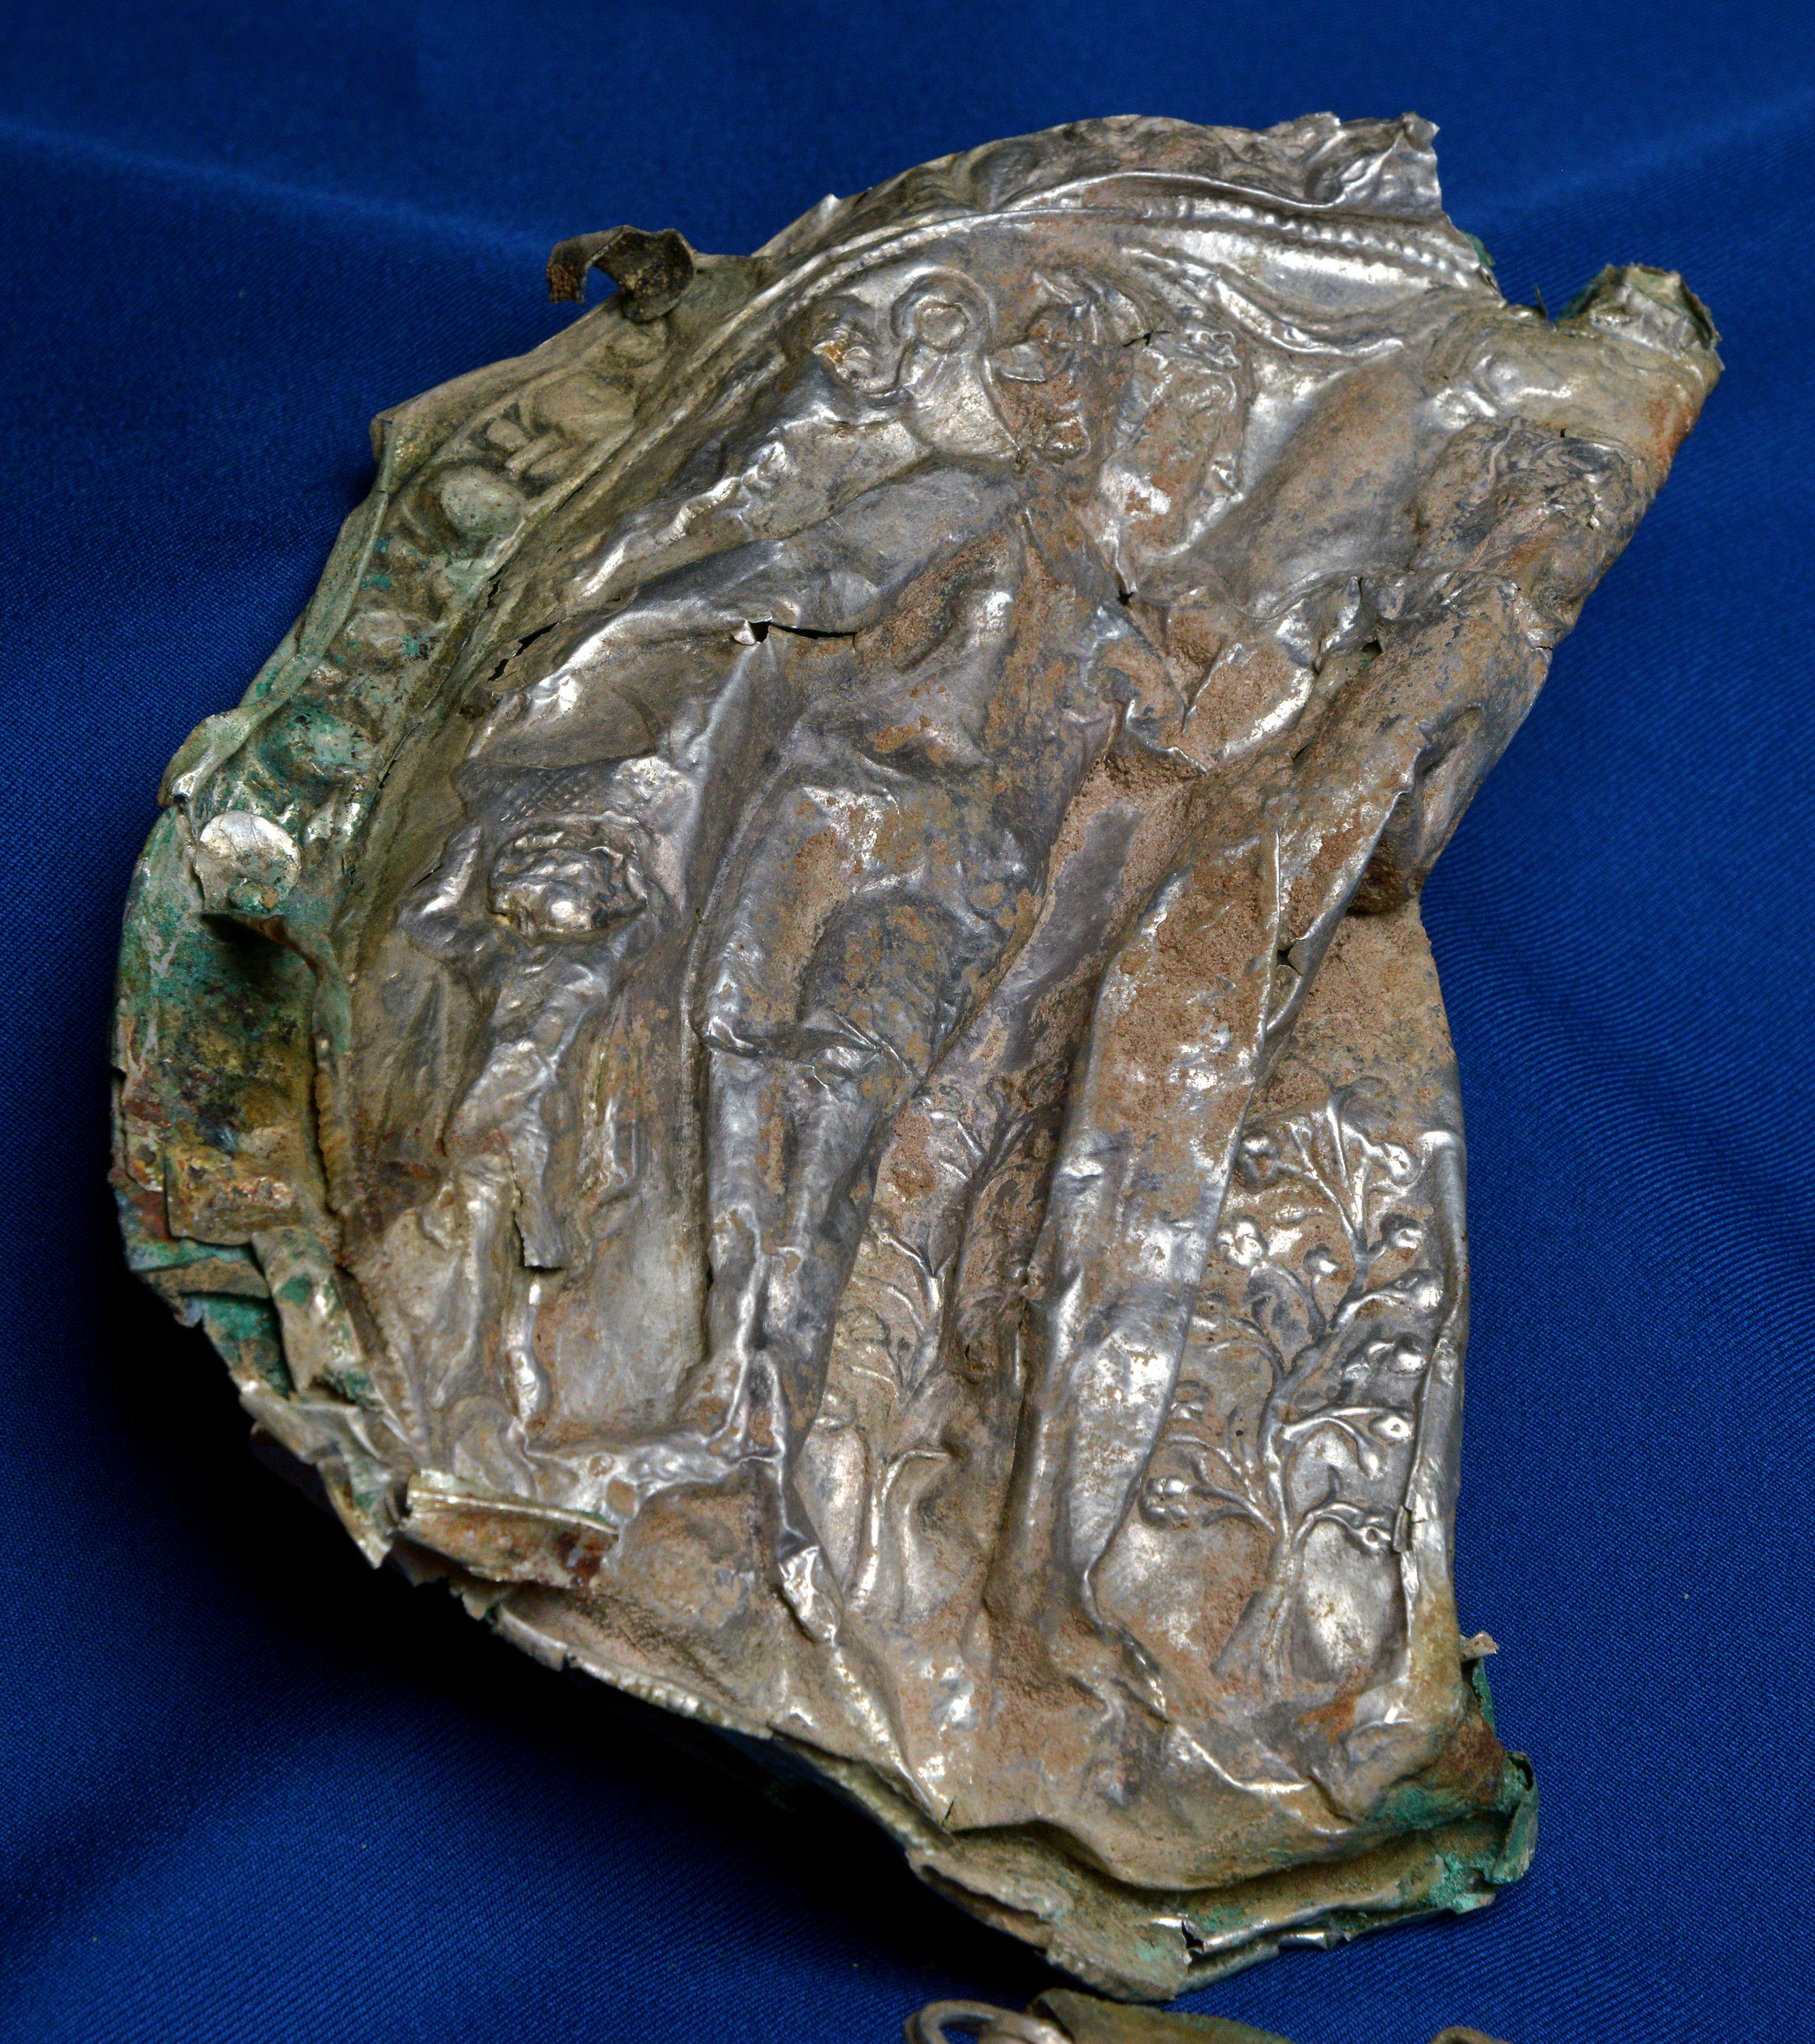 Blog gold, silver hoard History The Looter – caught with Roman